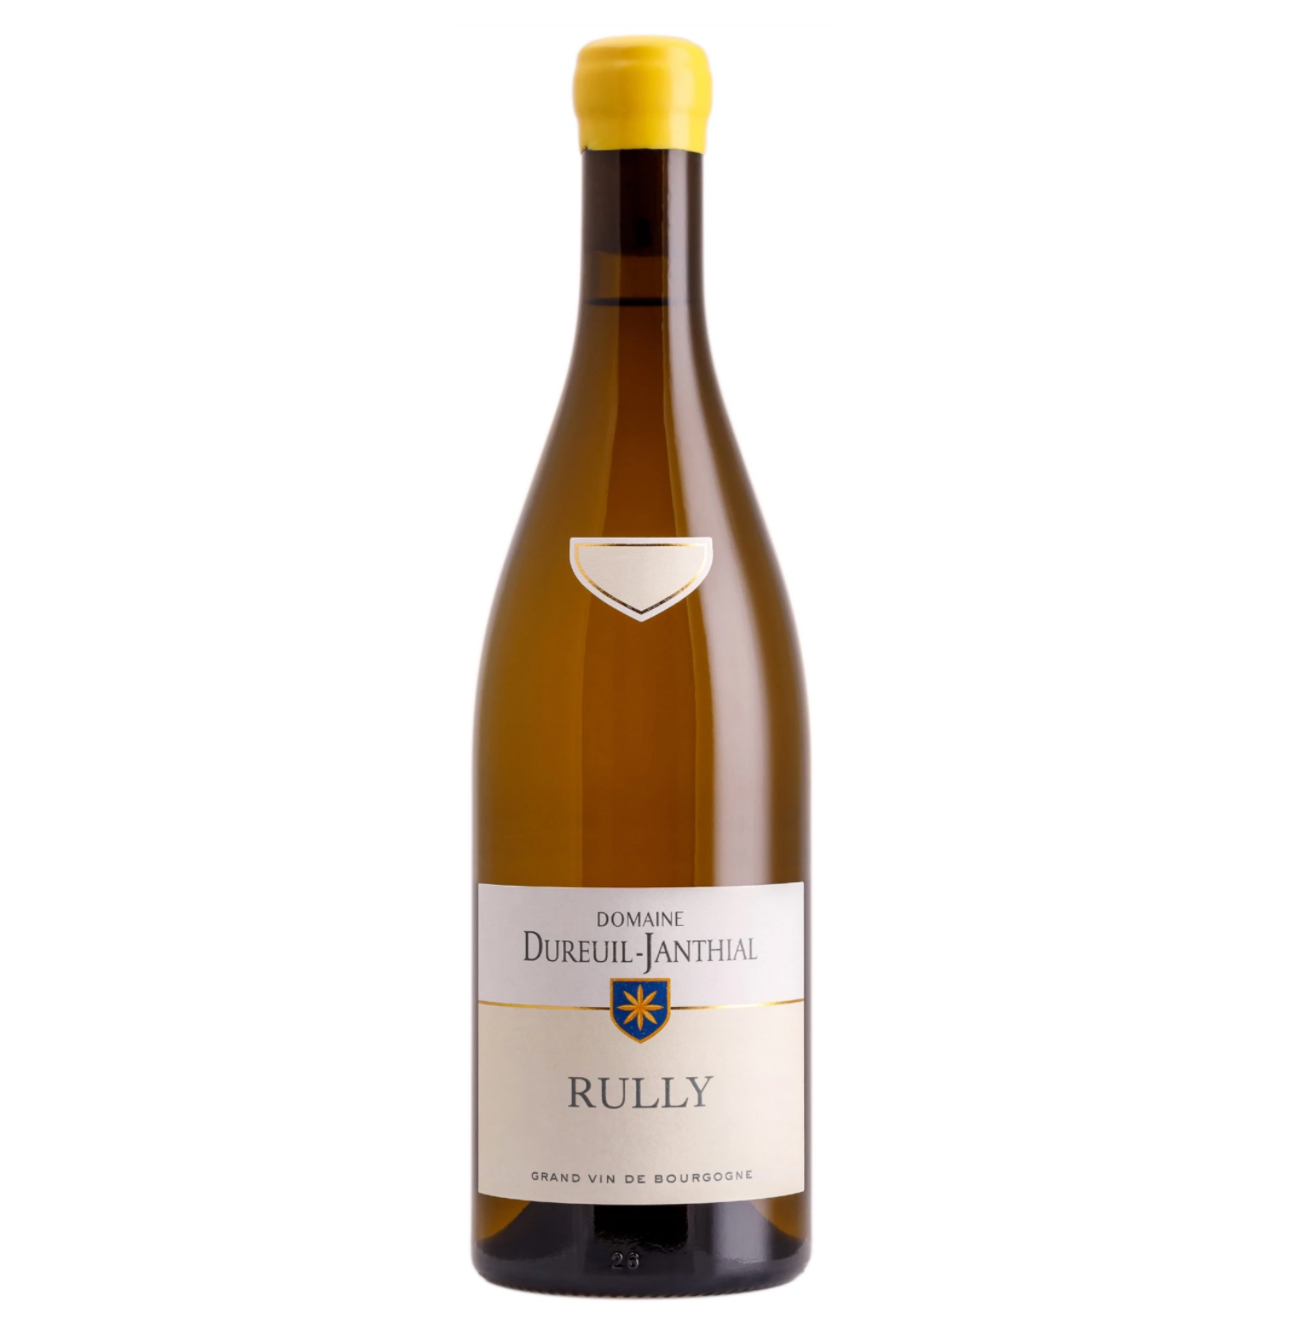 Domaine DUREUIL-JANTHIAL Rully Blanc 2019